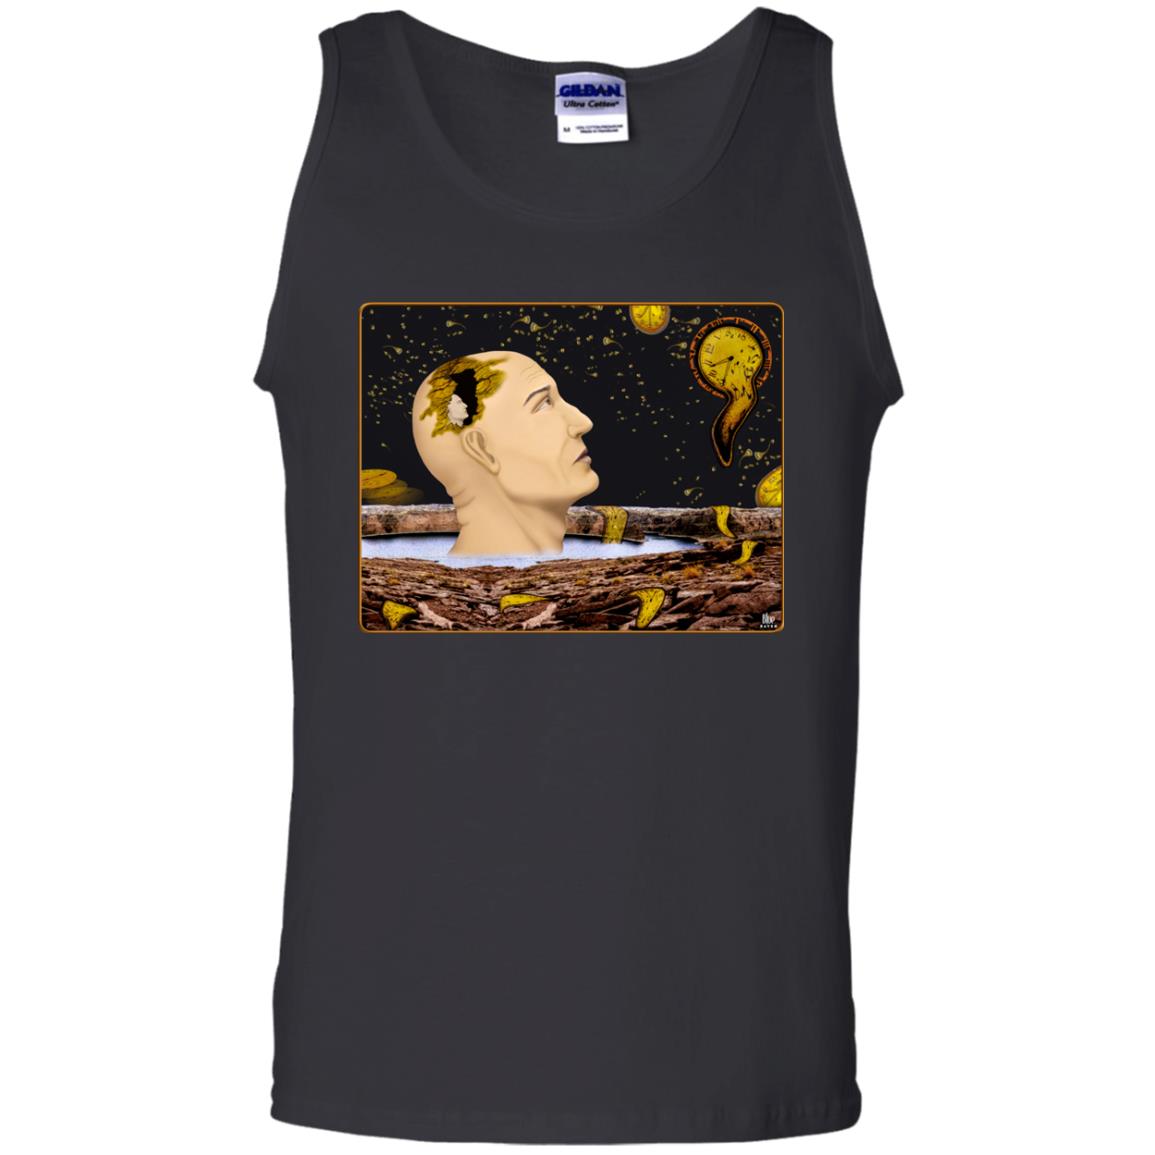 EARTH TIME RUNNING OUT - Men's Tank Top